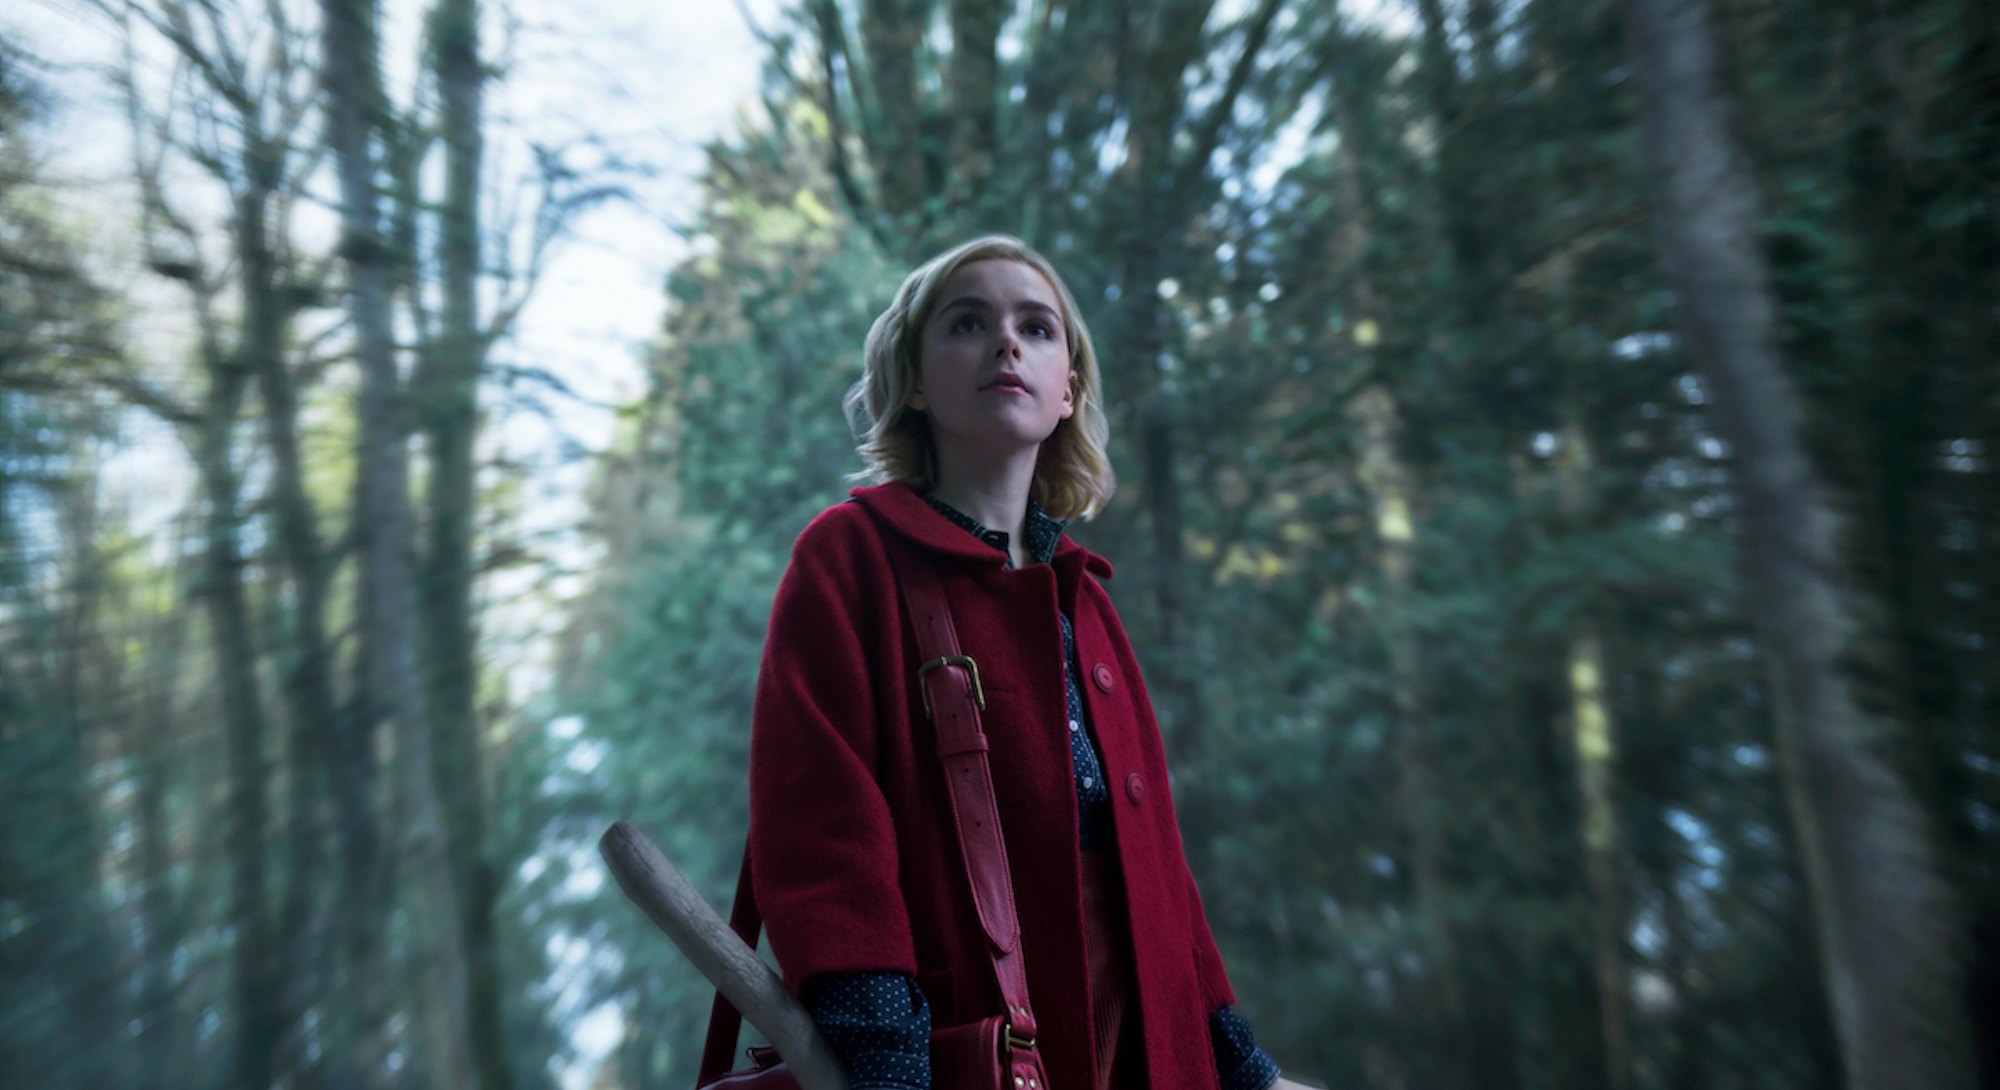 A still of Kiernan Shipka, from Chilling Adventures of Sabrina, standing in a wooded area, wearing a...